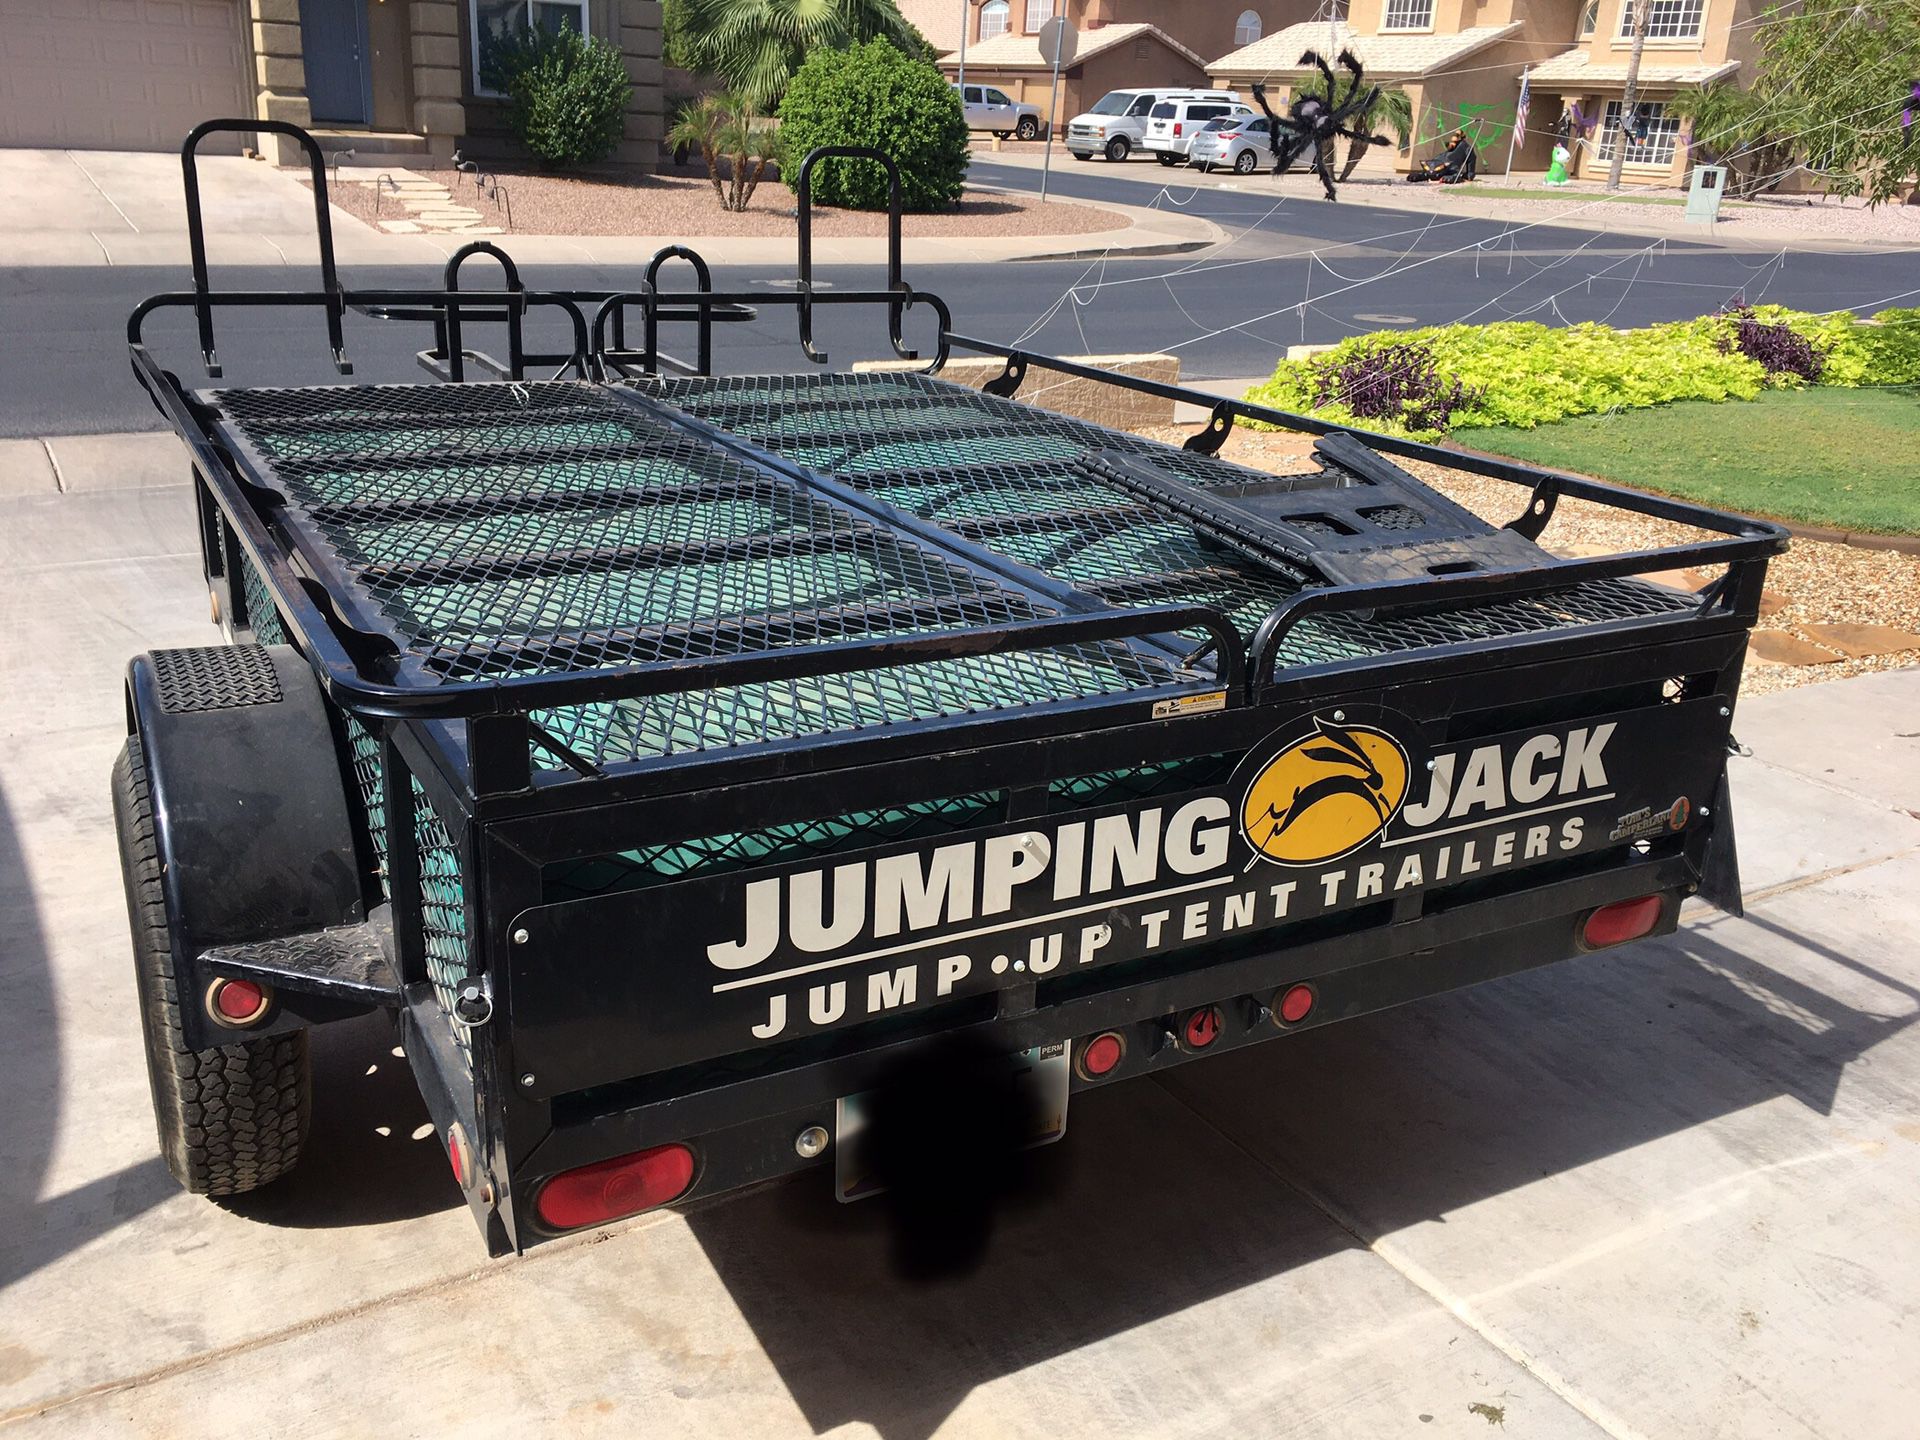 Jumping jack tent trailer